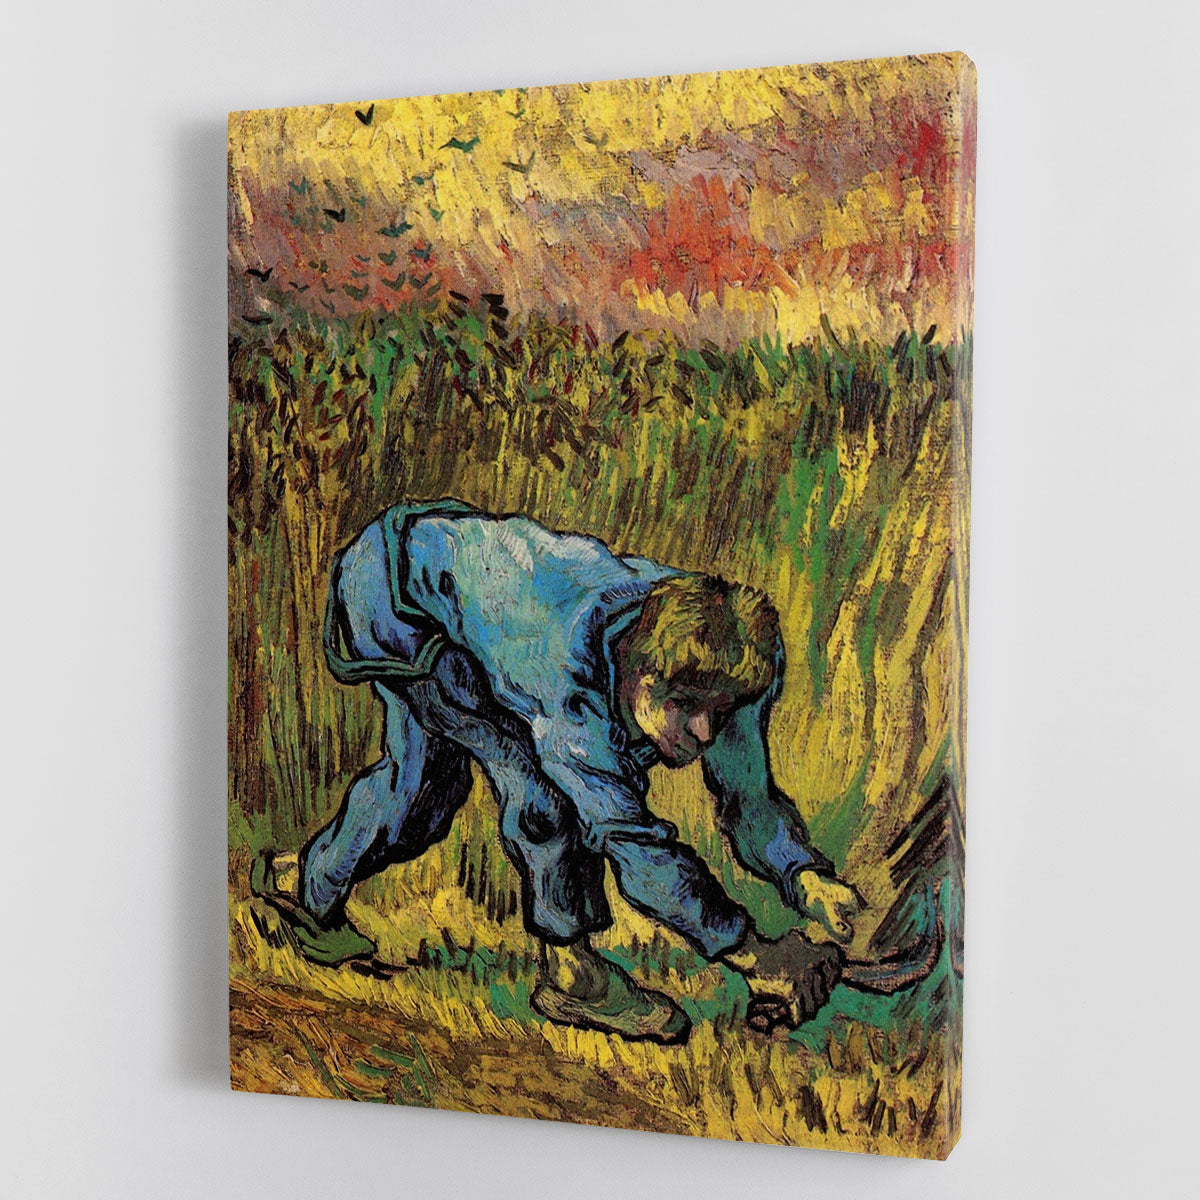 Reaper with Sickle after Millet by Van Gogh Canvas Print or Poster - Canvas Art Rocks - 1